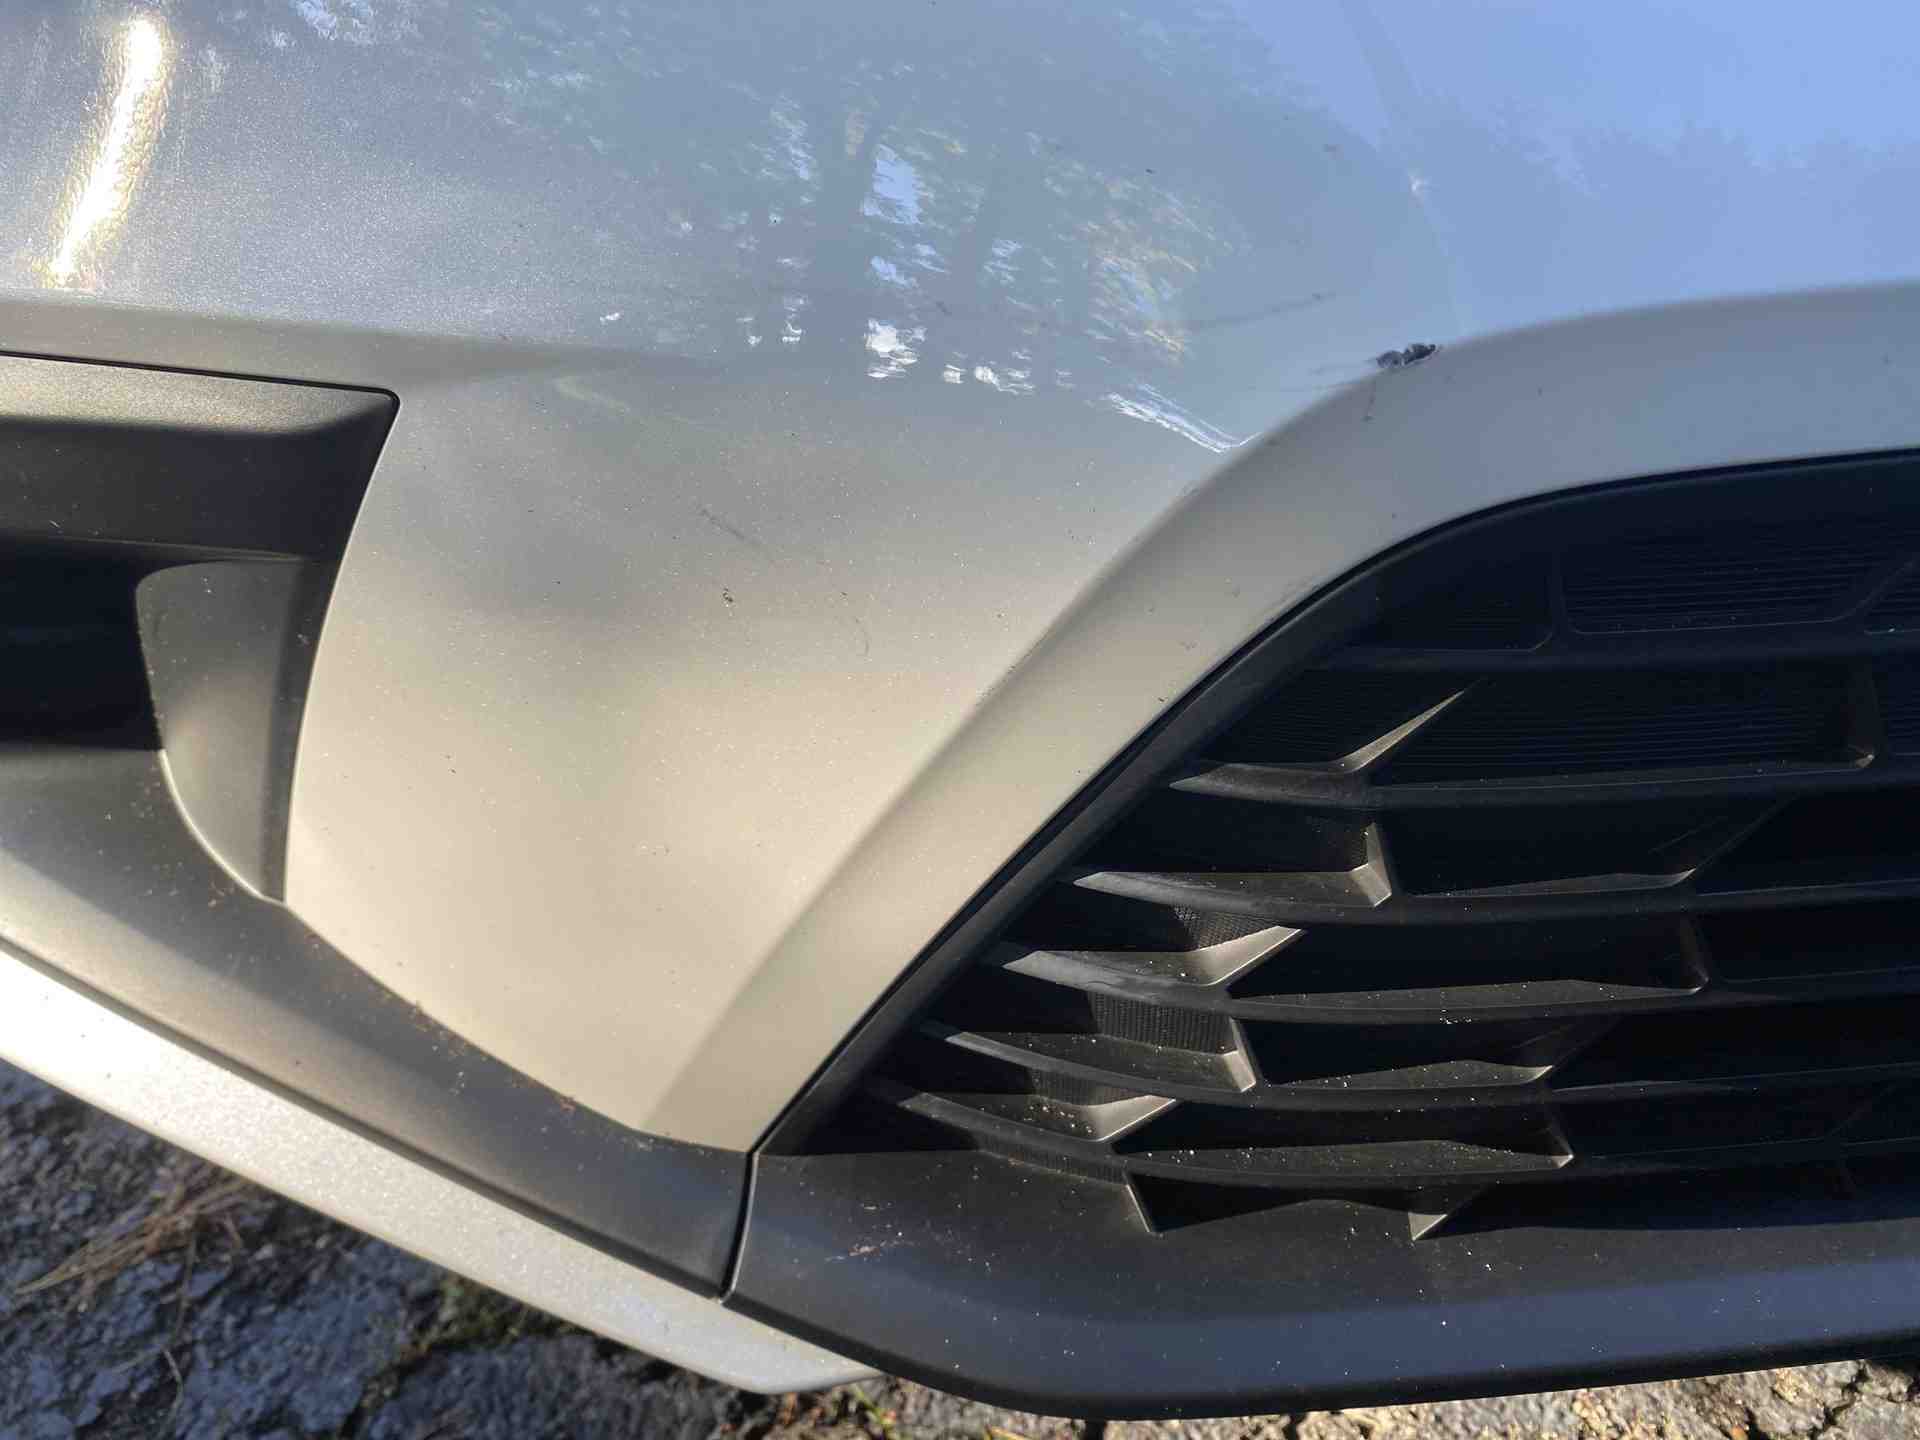 Should I file an insurance claim for a small dent on my car?